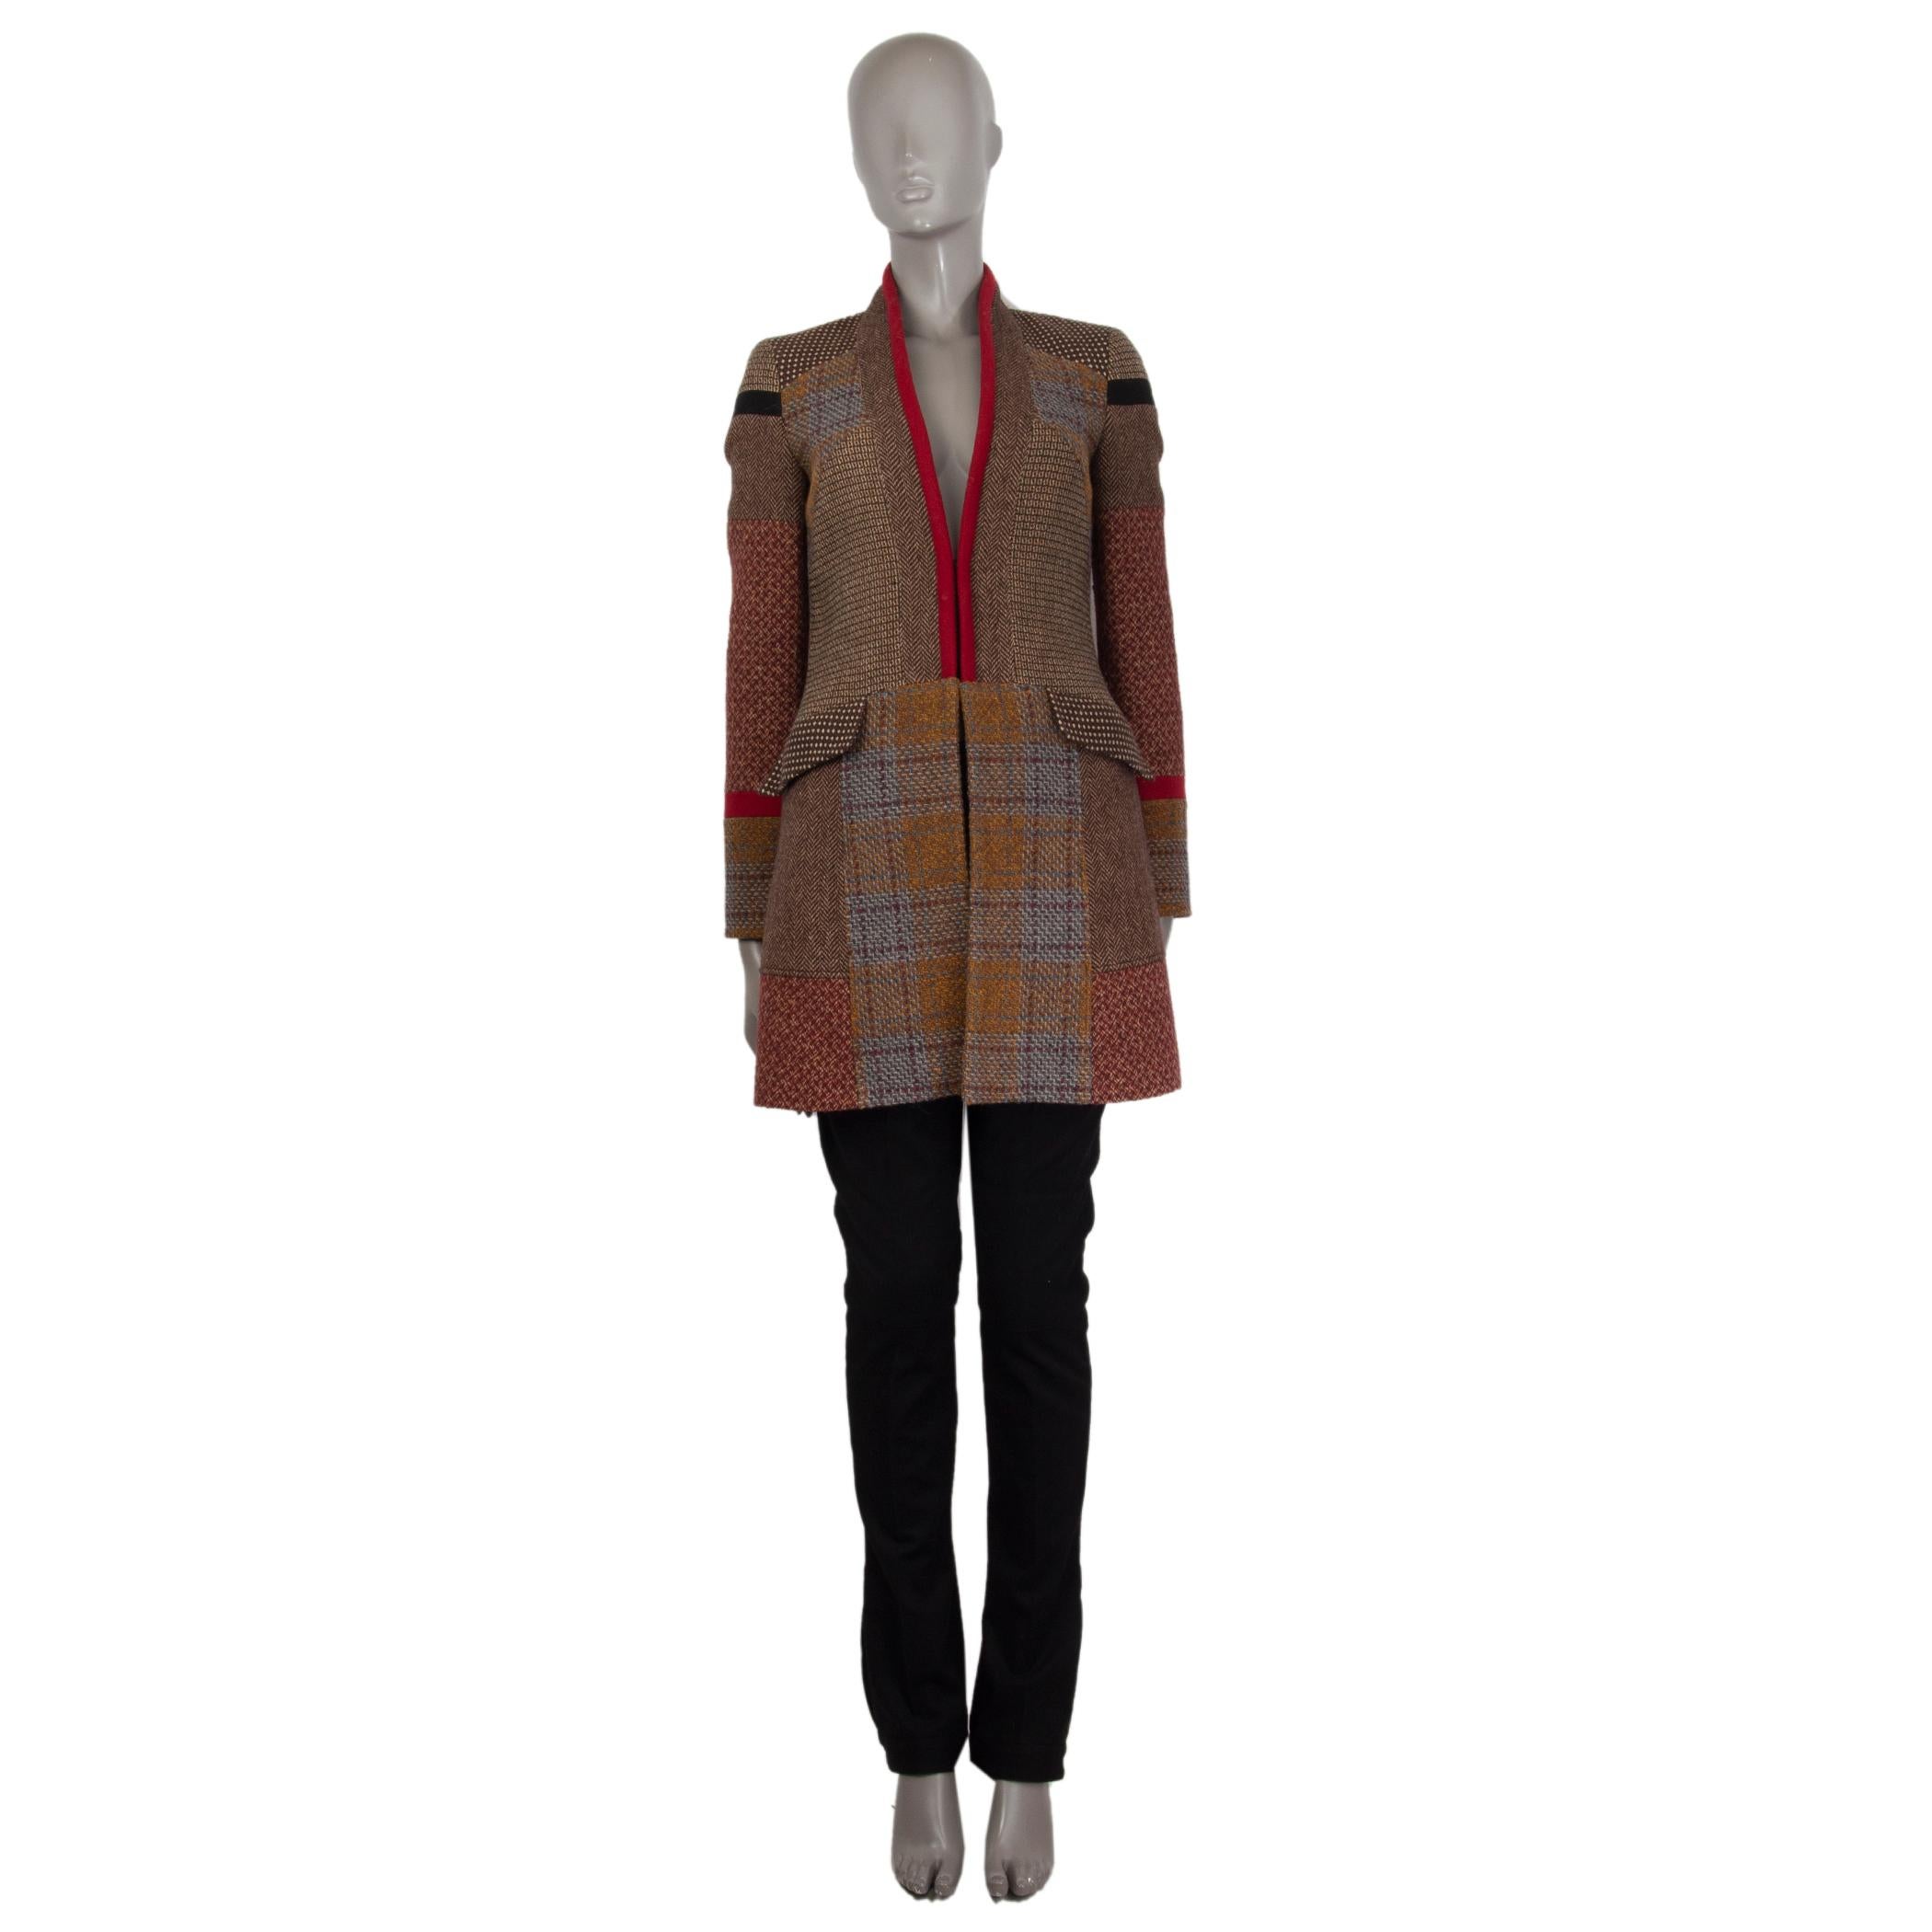 authentic Etro collarless patchwork coat in brown, red, gey, beige, violet, black, and mustard wool (100%). With piped neck and two flap pockets on the sides. Closes with concealed hooks on the front. Lined in black polyester (97%) and elastane